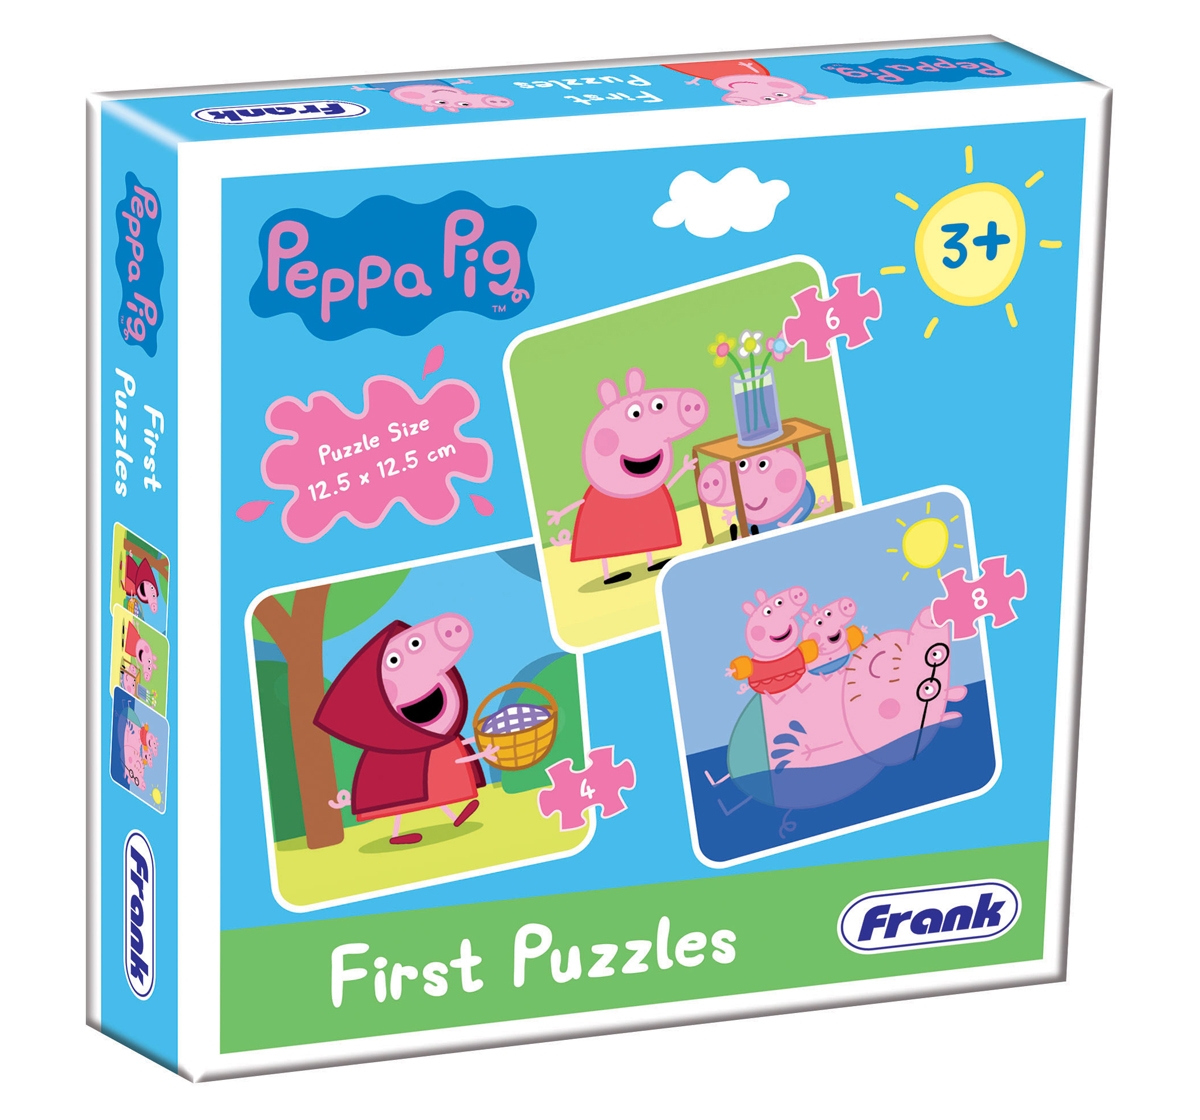 Frank | Frank Peppa Pig First Puzzles 3 in 1, 3Y+